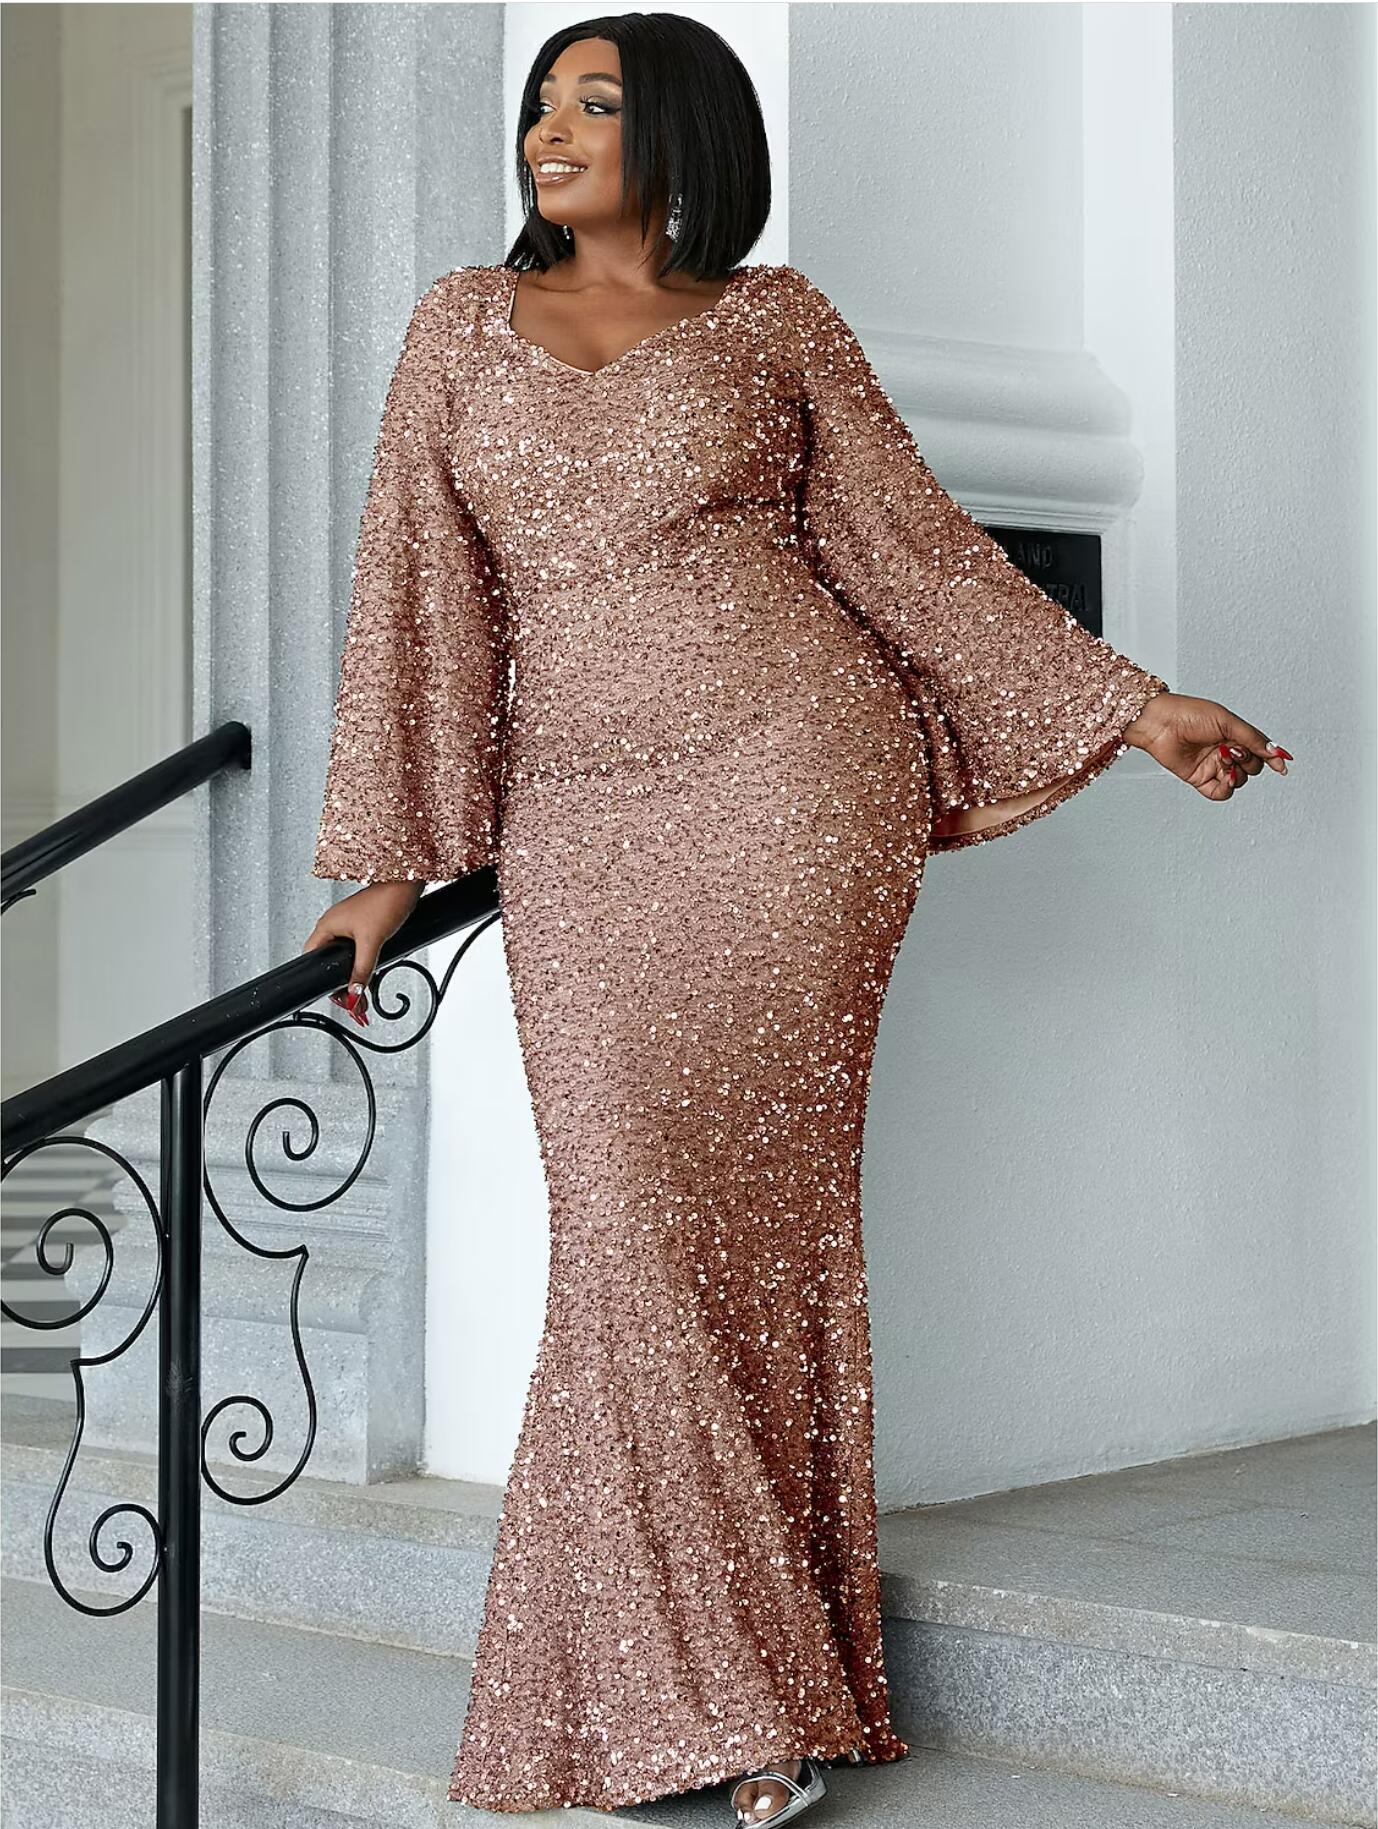 Wedding Guest Dresses Plus Size Dress Cocktail Party Floor Length Long Sleeve Scoop Neck Sequined with Glitter